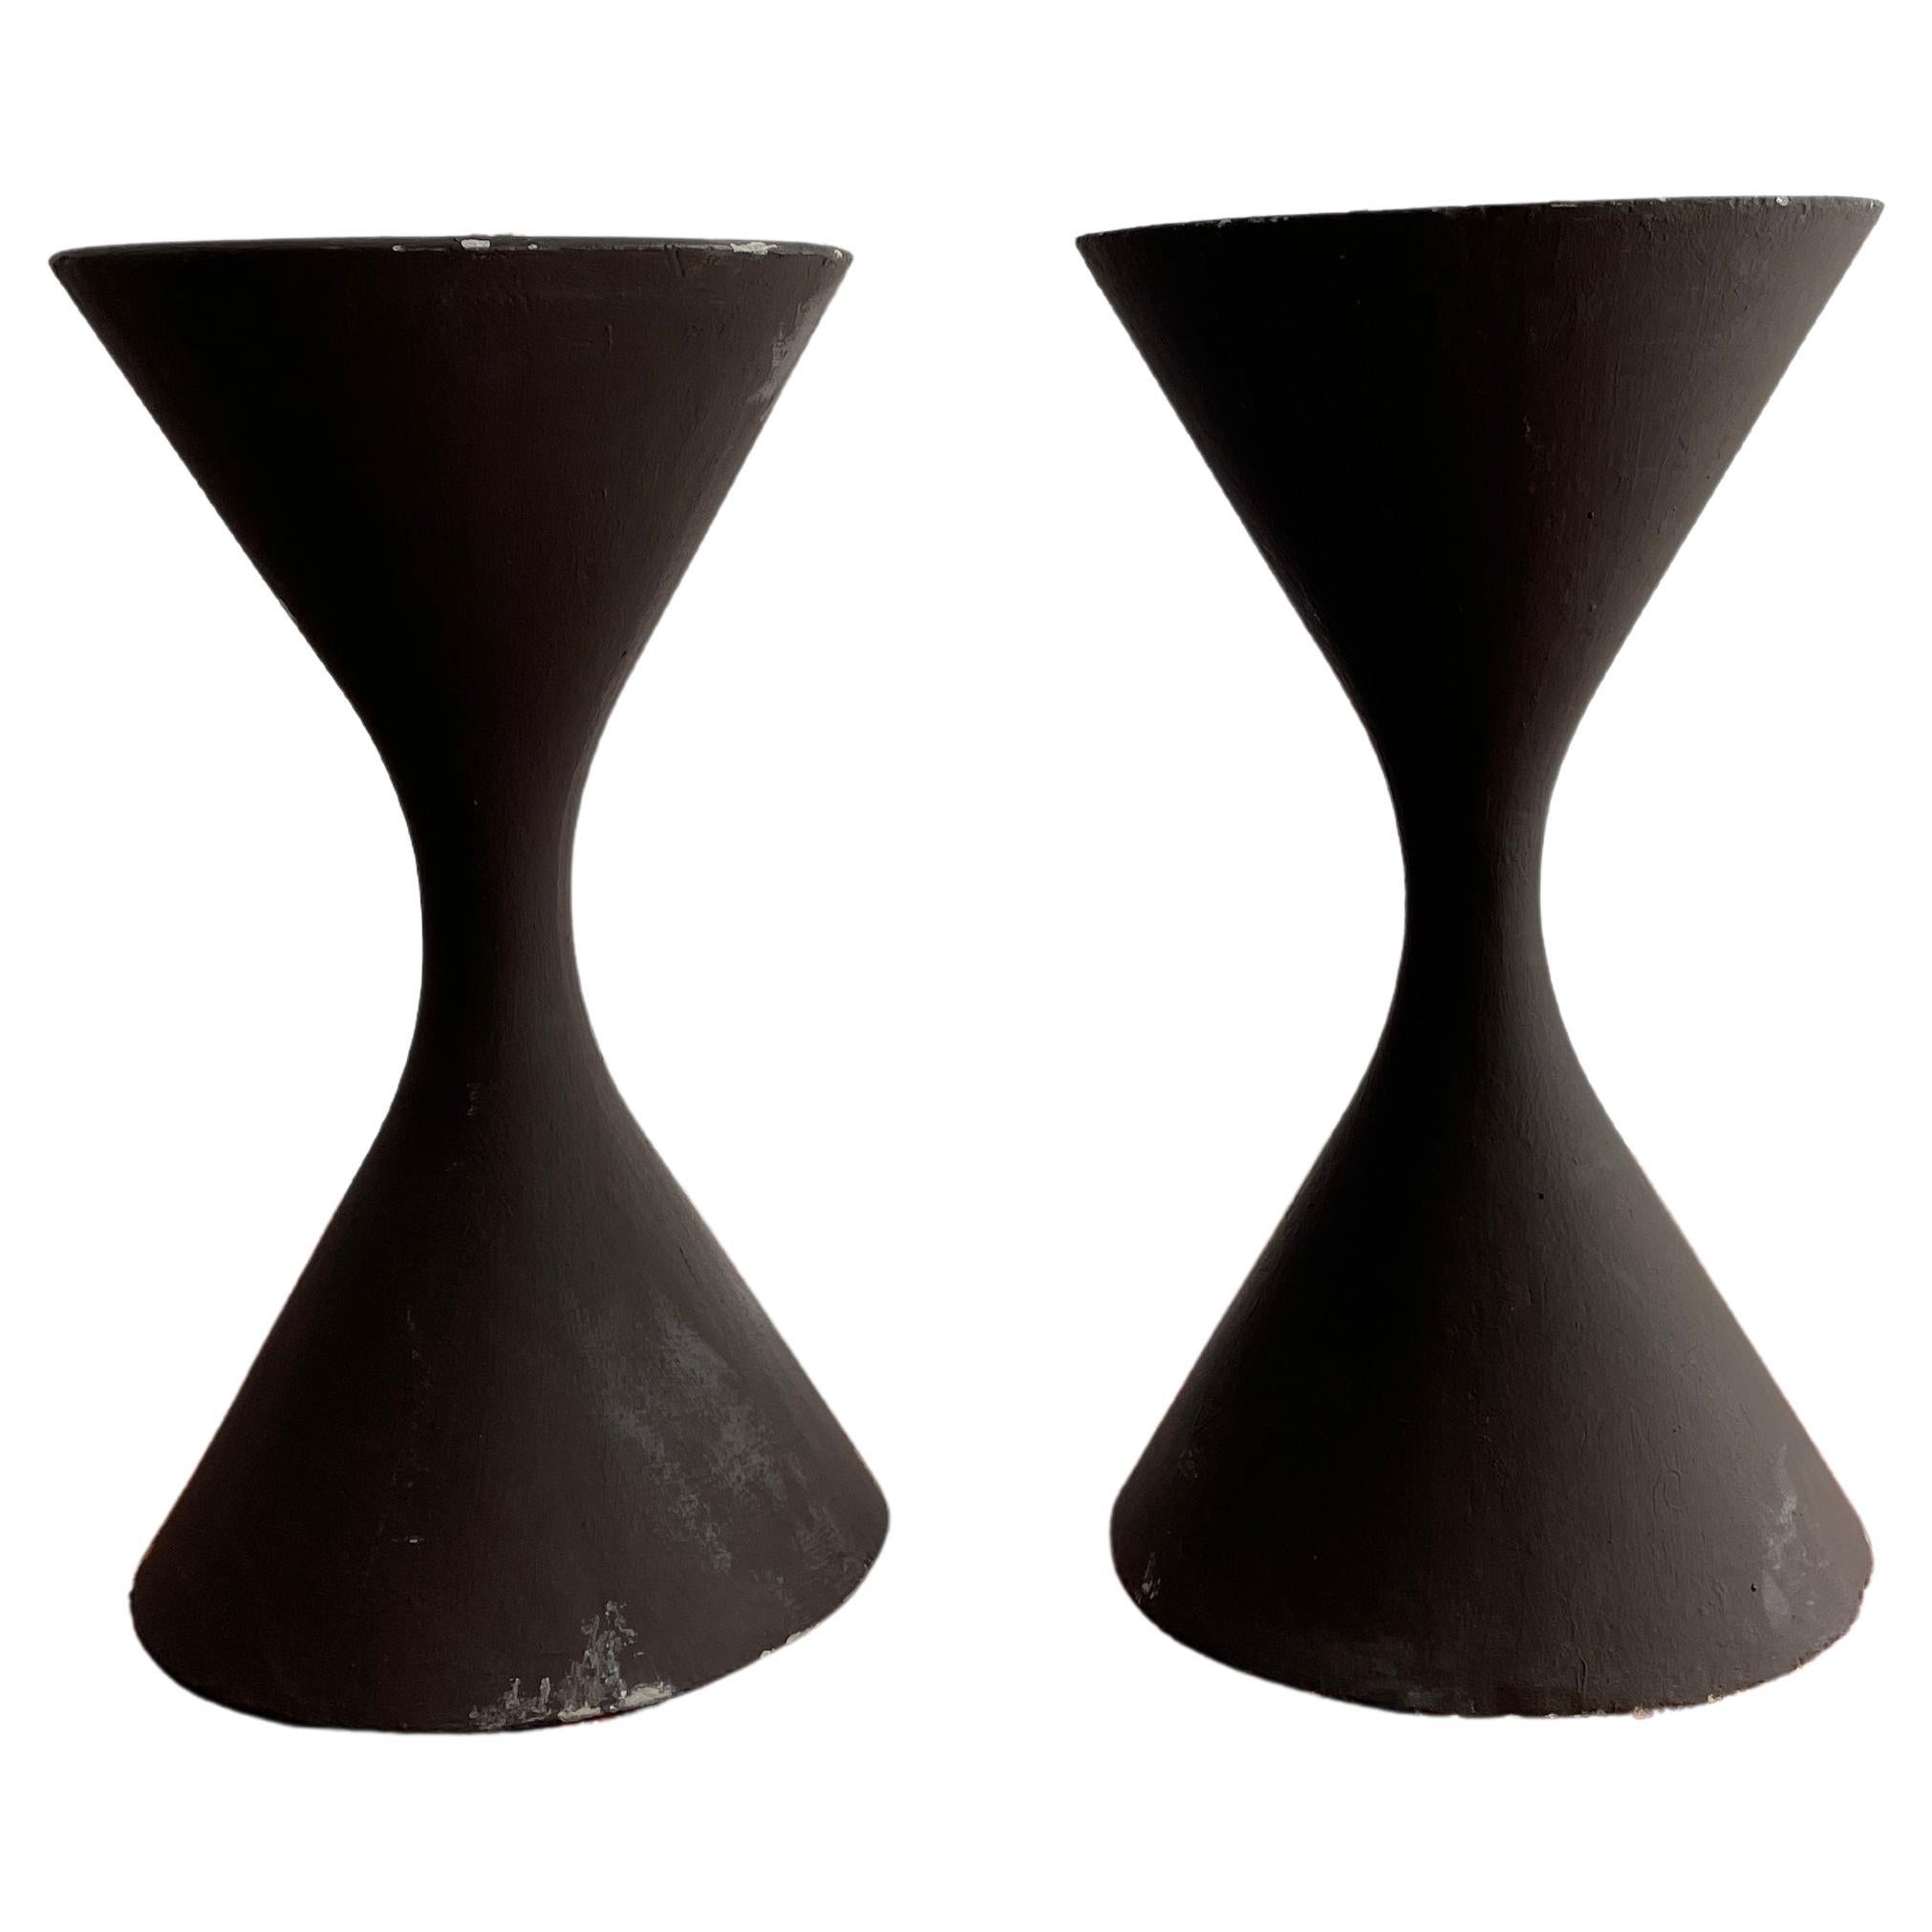 Pair of French Brown Diabolo Planter by Willy Guhl and Anton Bee for Eternit